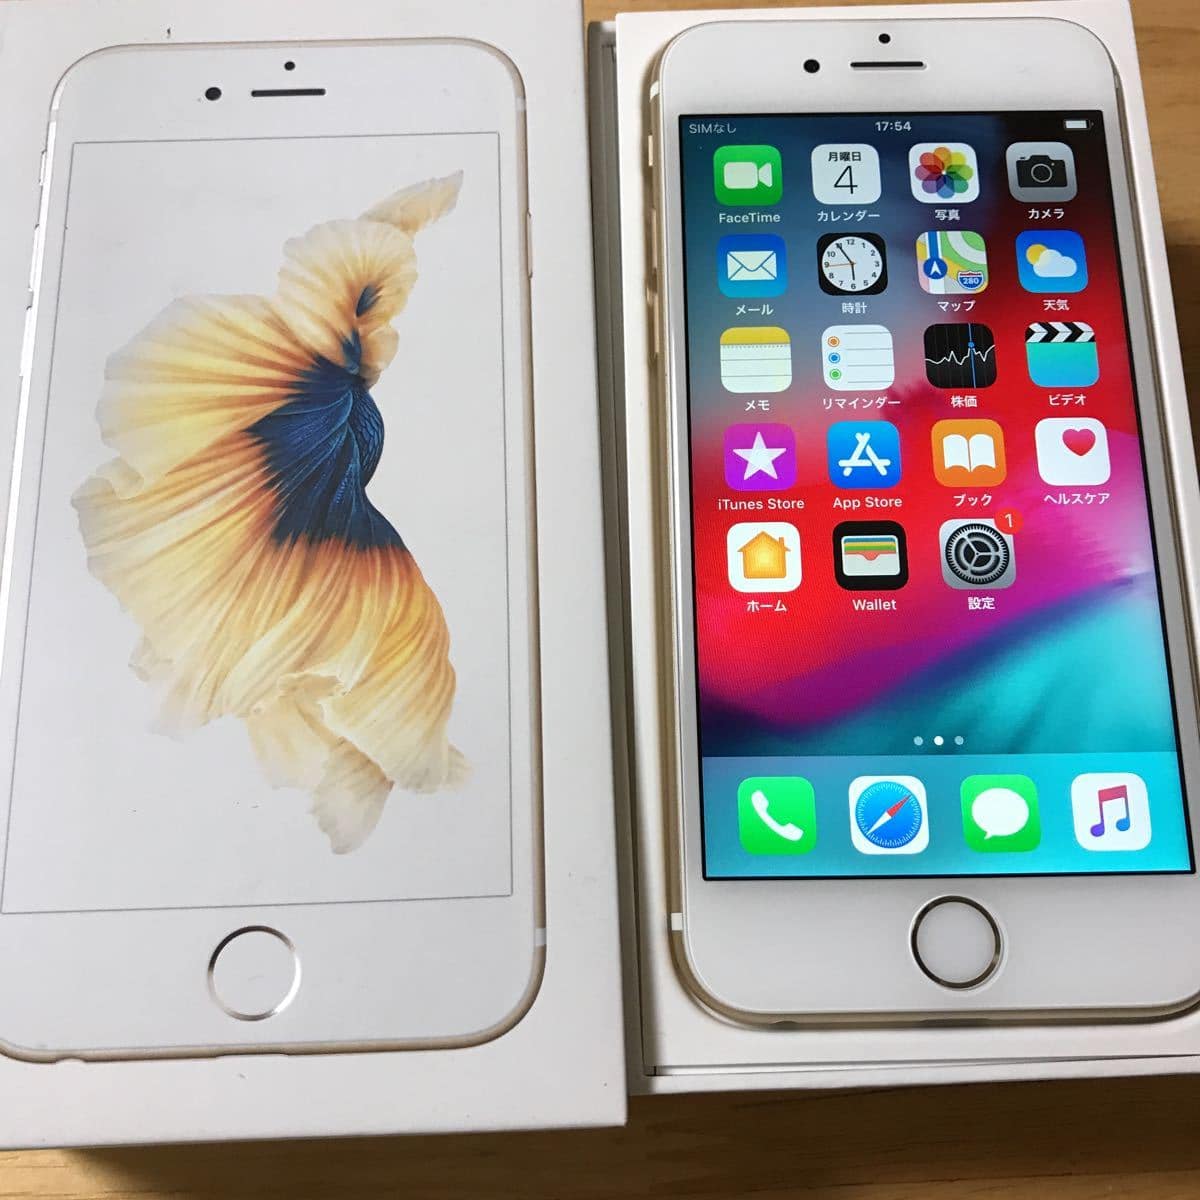 [Used]iPhone 6s 64gb SIM free - BE FORWARD Store